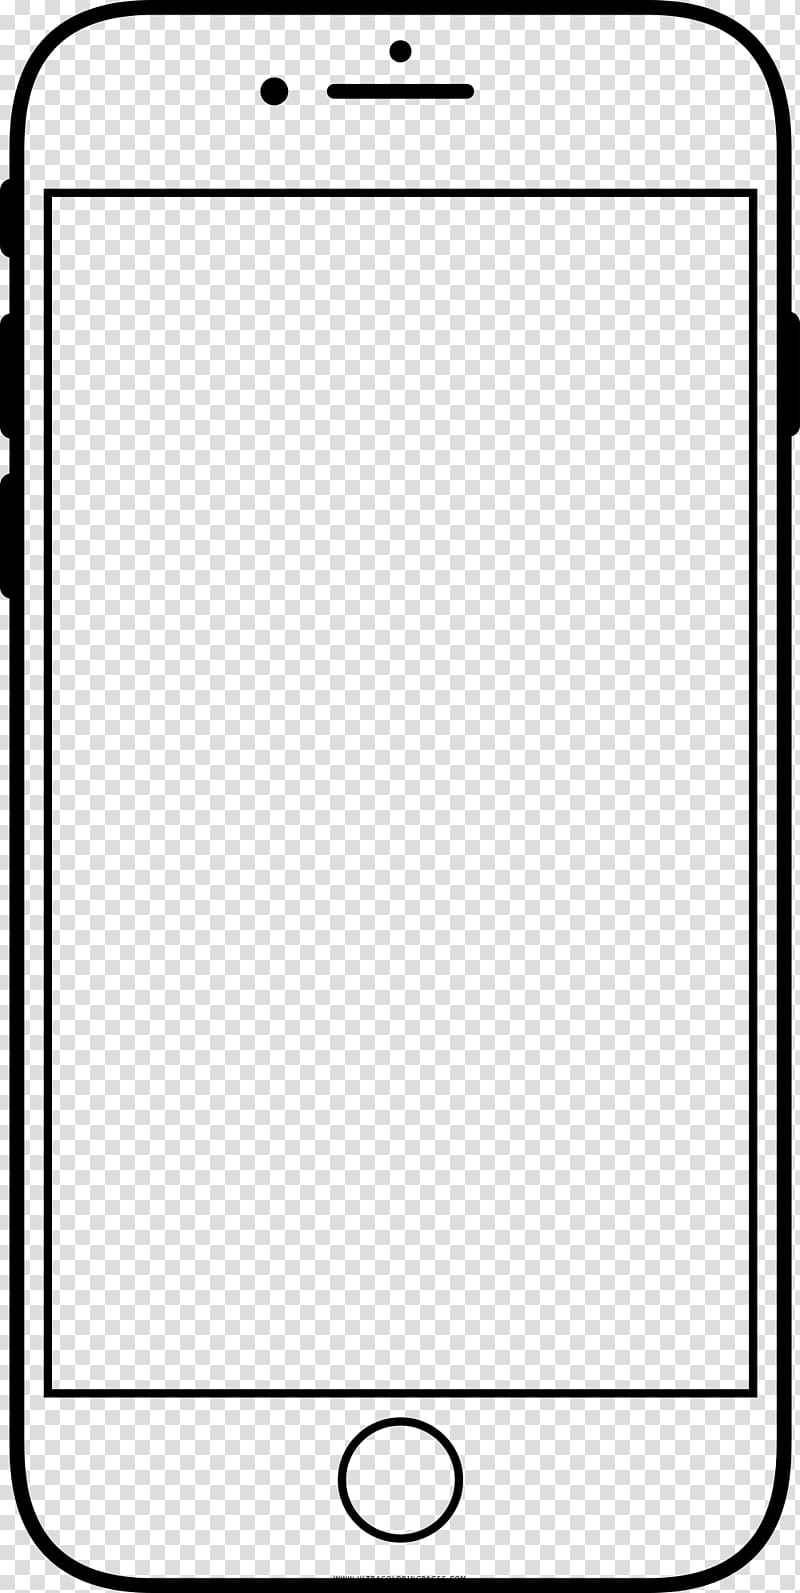 iPhone 6 illustration, Praeter Labs iPhone 4 Drawing Telephone Mobile Phone Accessories, Celular phone transparent background PNG clipart